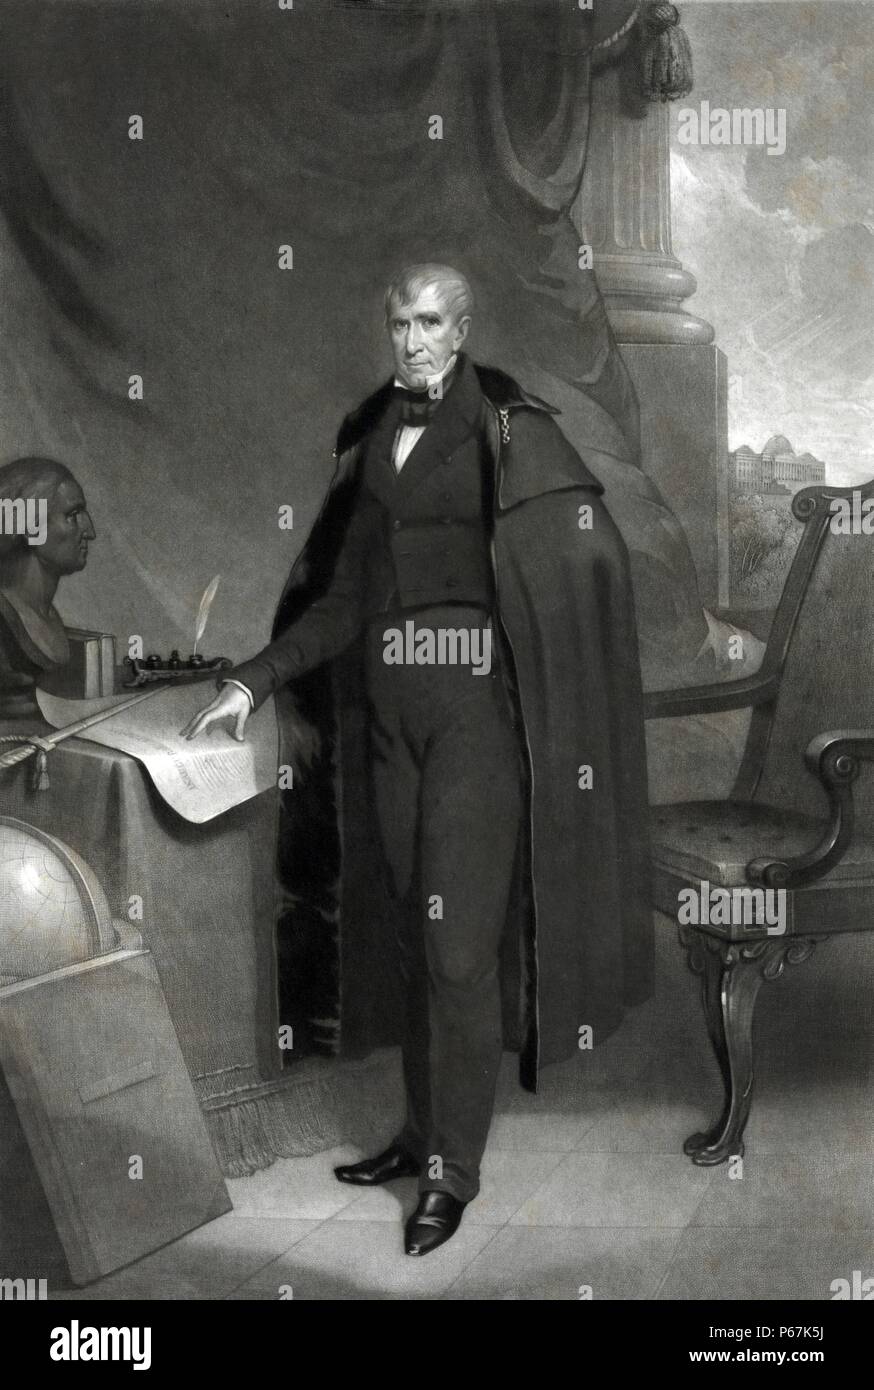 President William Harrison. Harrison was the ninth President of the United States, an American military officer and politician, and the first president to die in office. Stock Photo